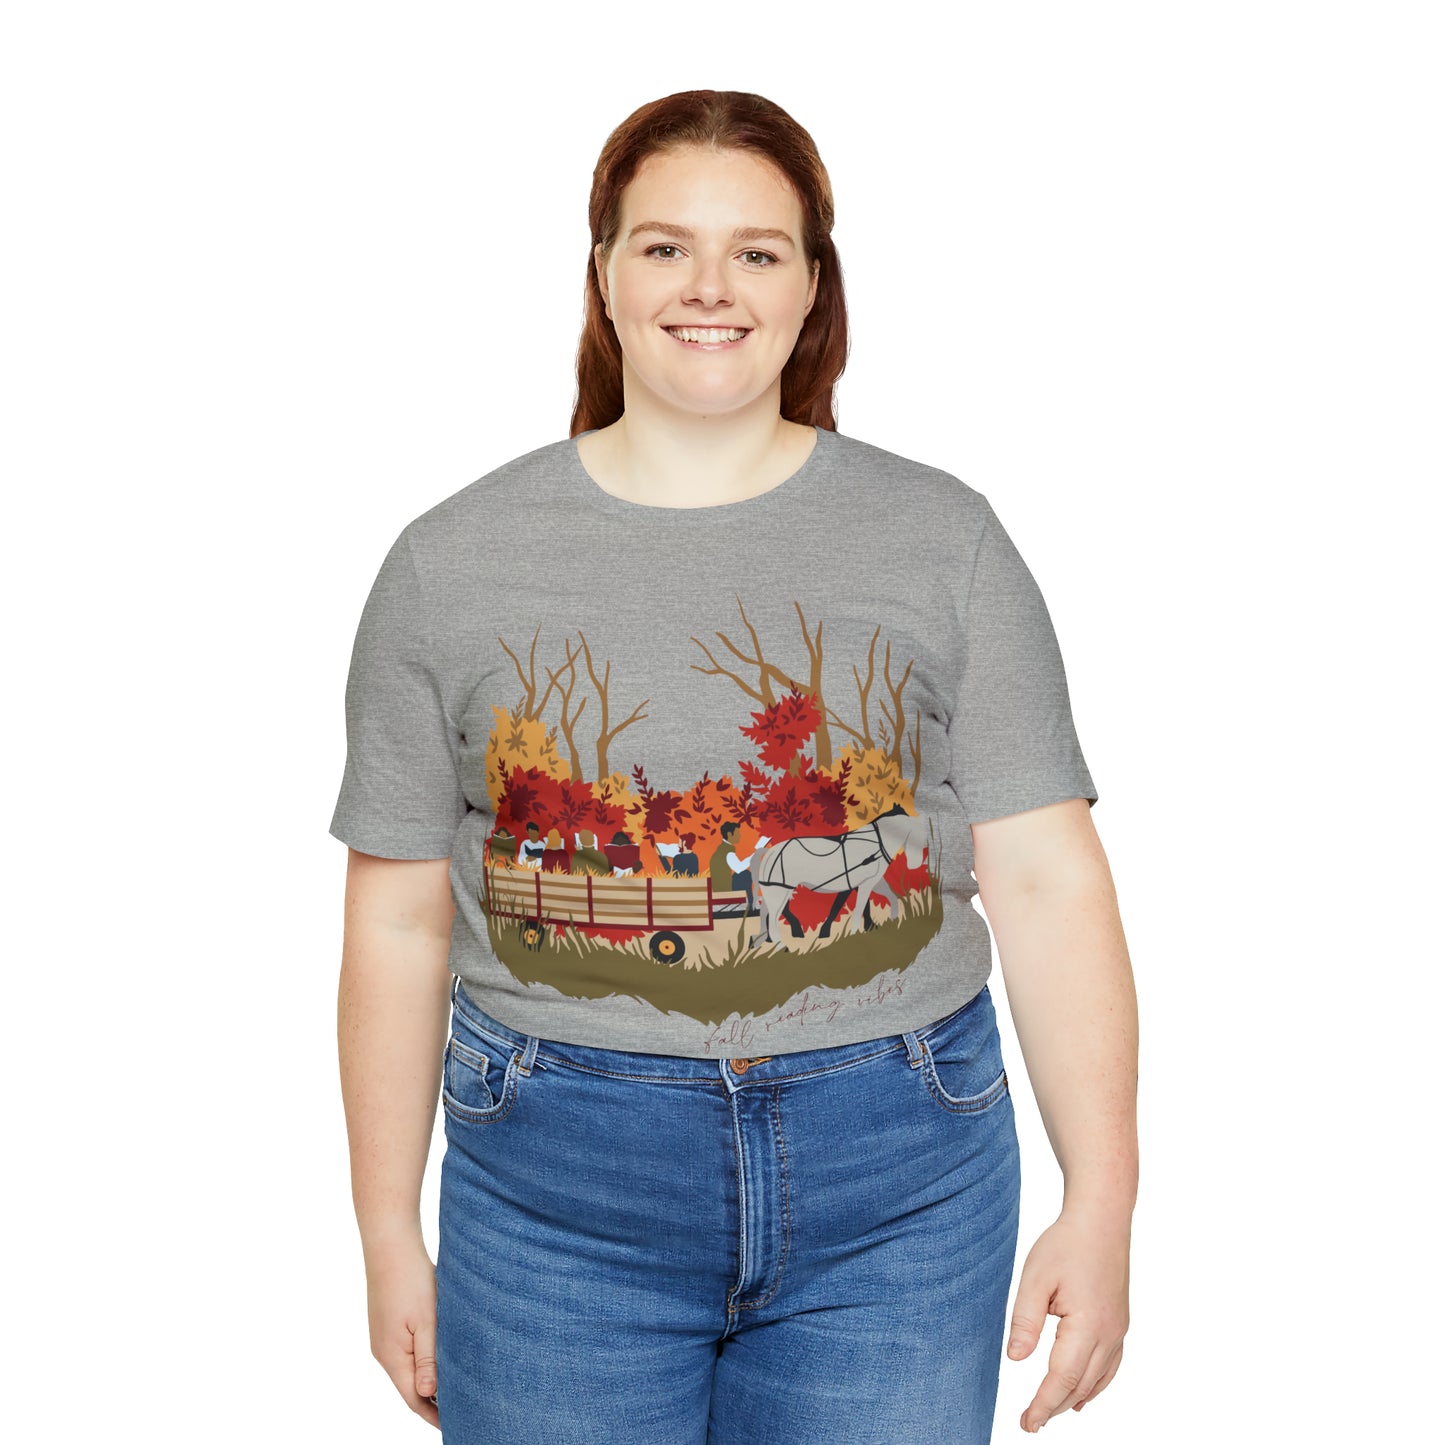 Fall Reading Vibes Unisex Short Sleeve Tee (Full Color)